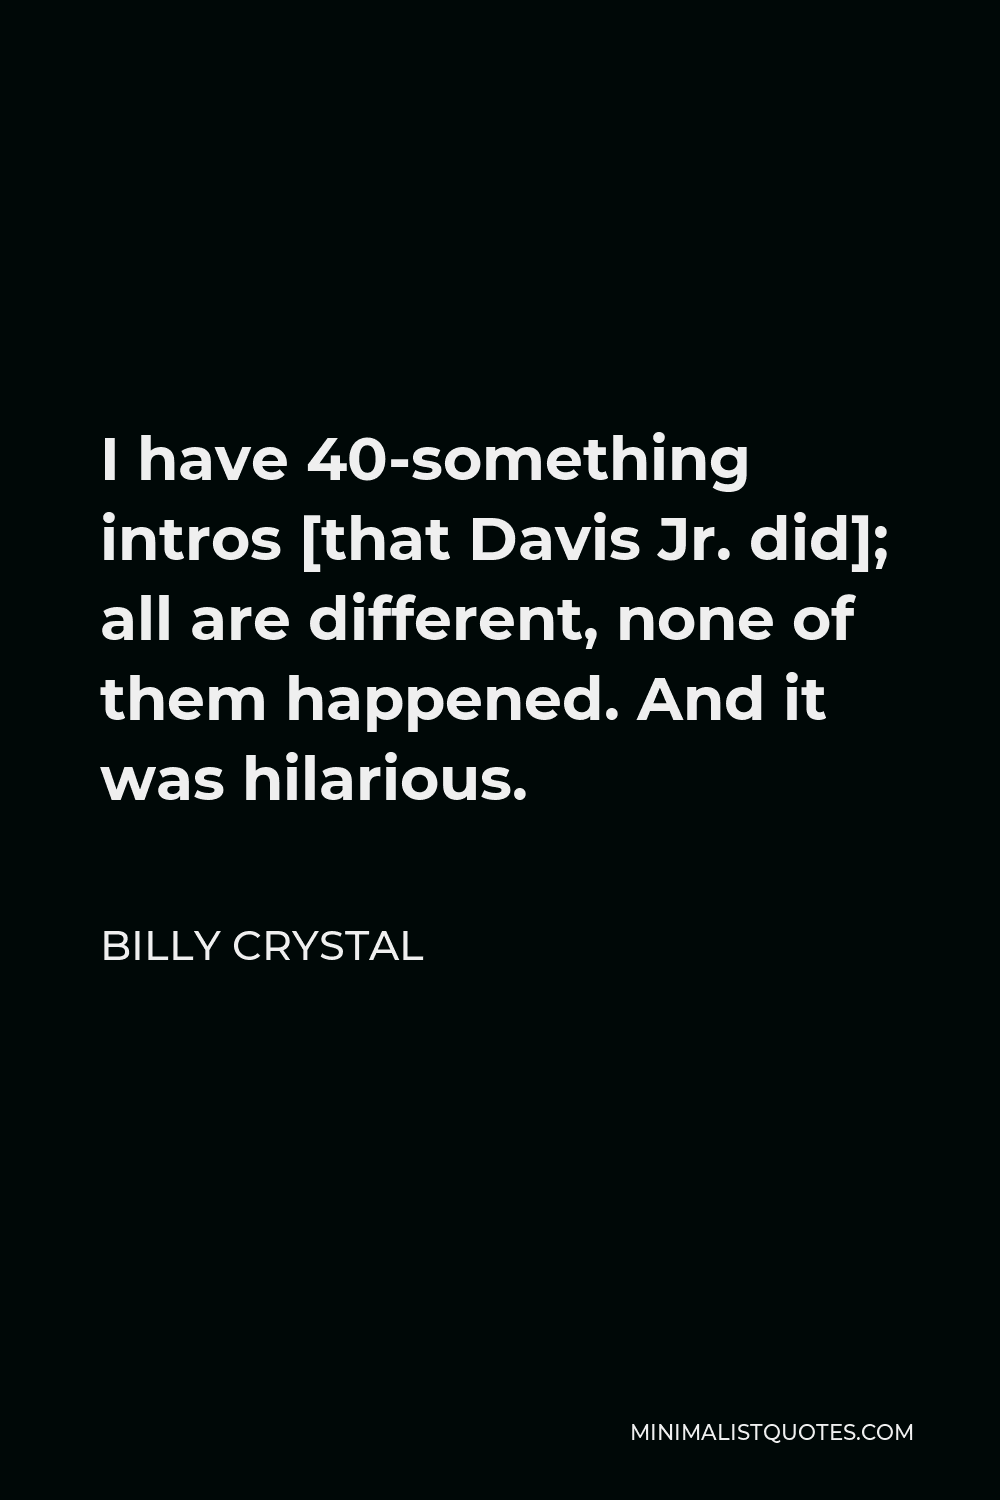 Billy Crystal Quote - I have 40-something intros [that Davis Jr. did]; all are different, none of them happened. And it was hilarious.